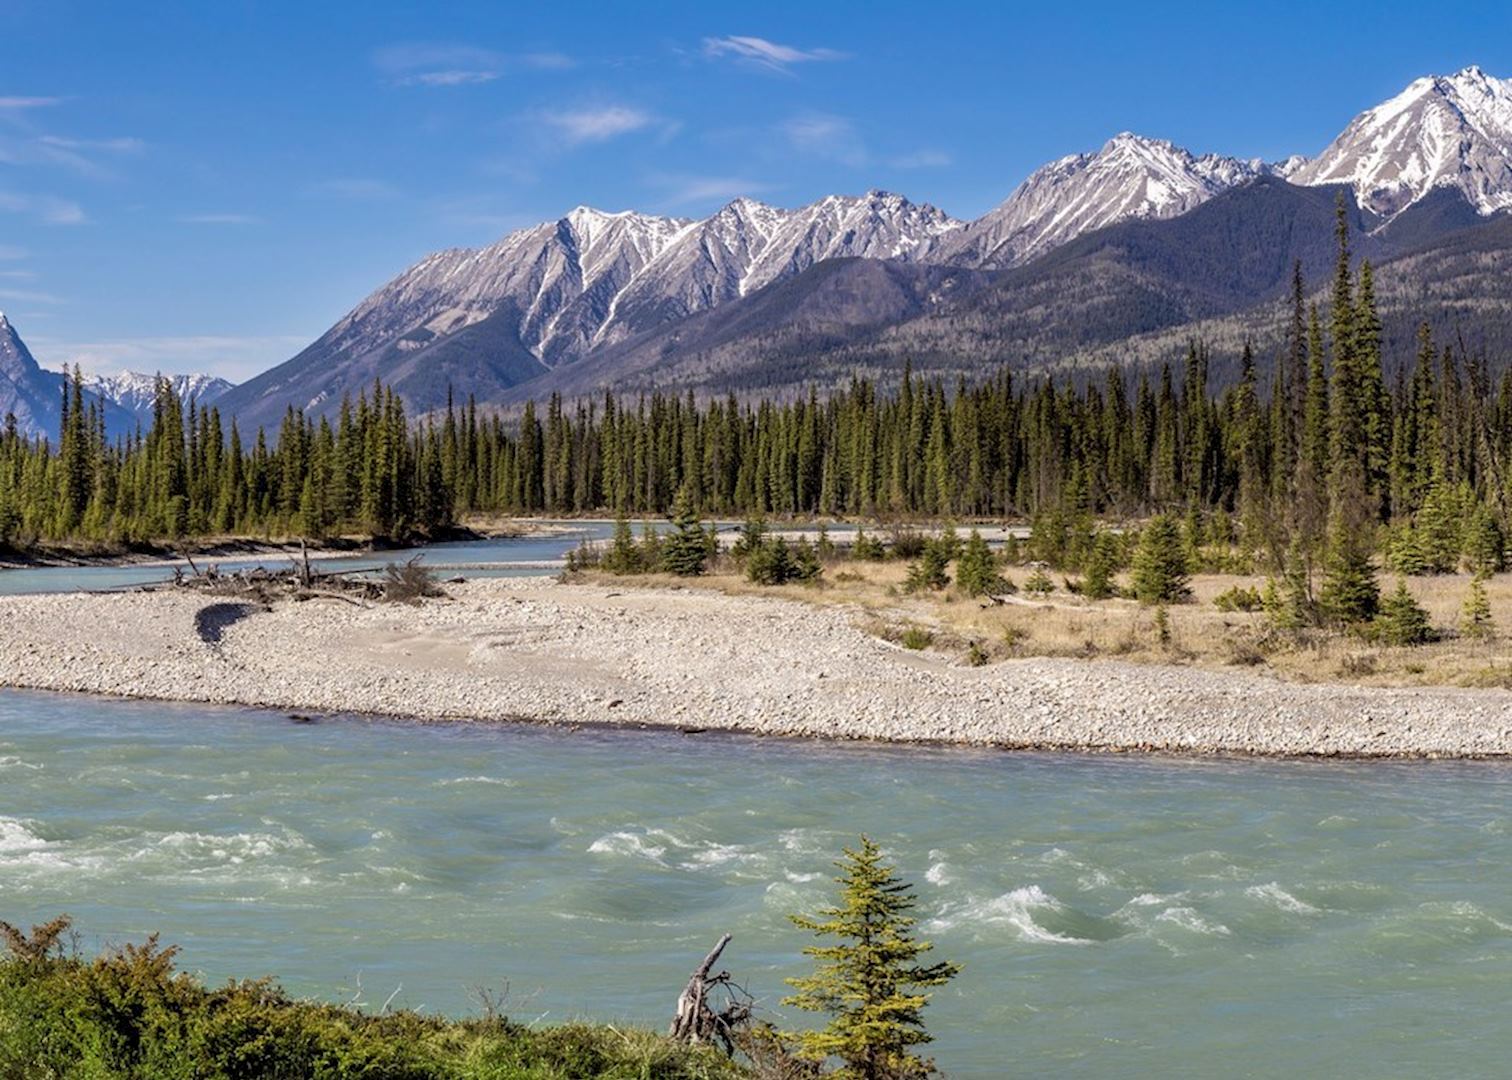 Visit Jasper on a trip to Canada | Audley Travel